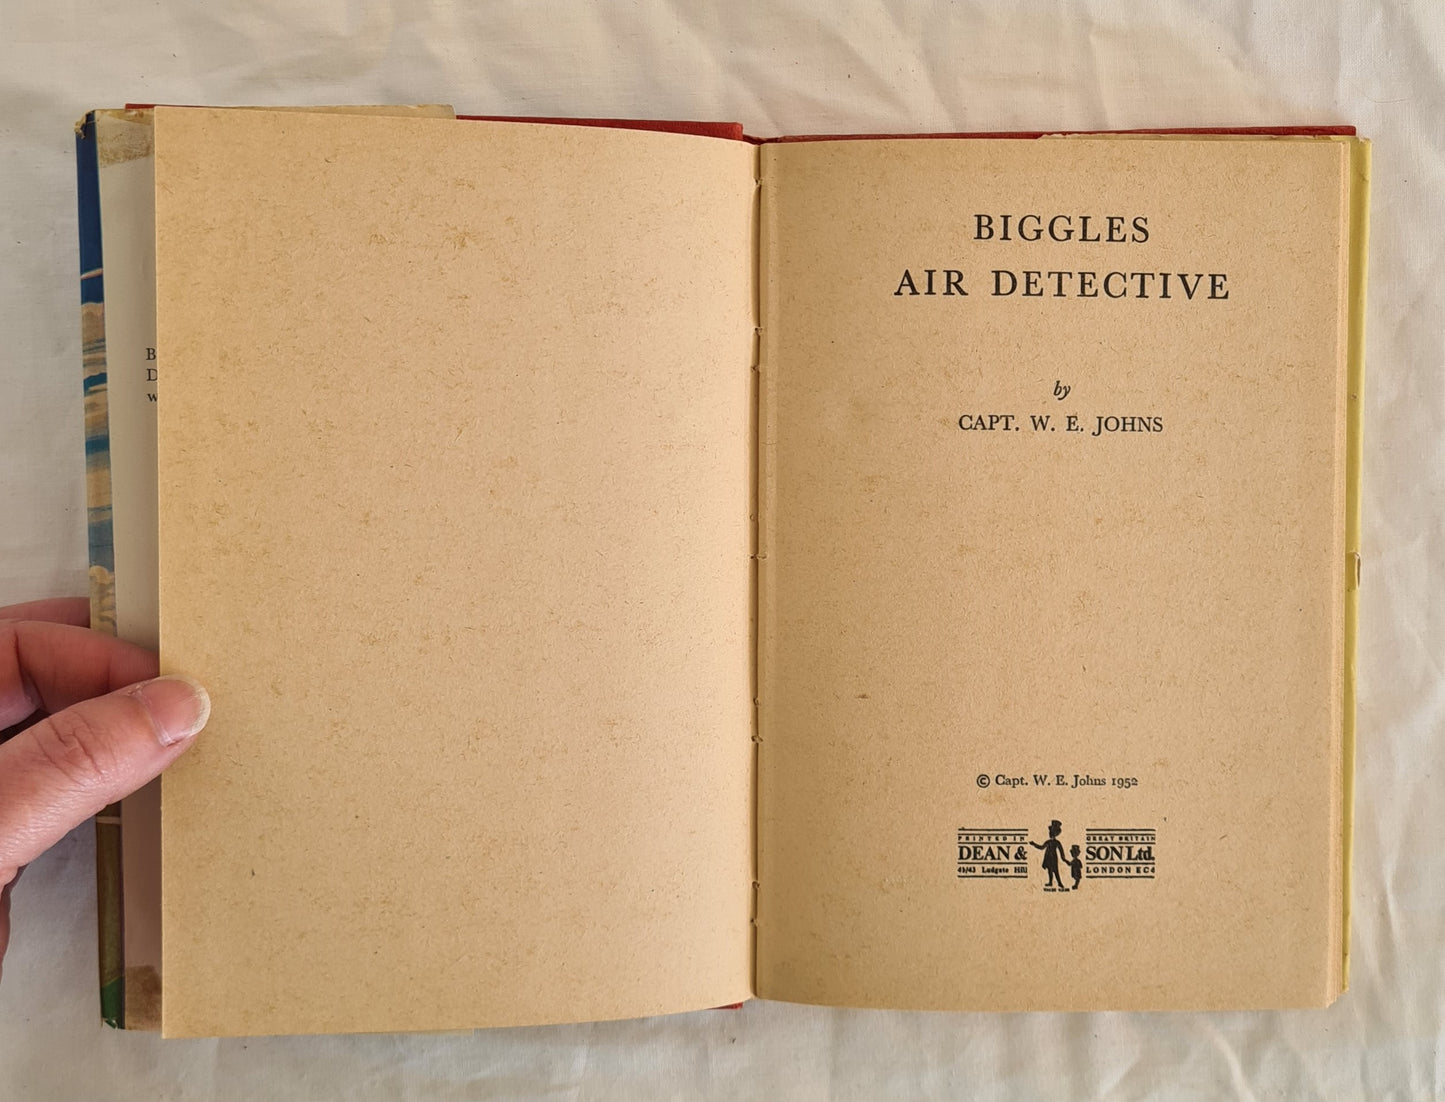 Biggles Air Detective by Captain W. E. Johns